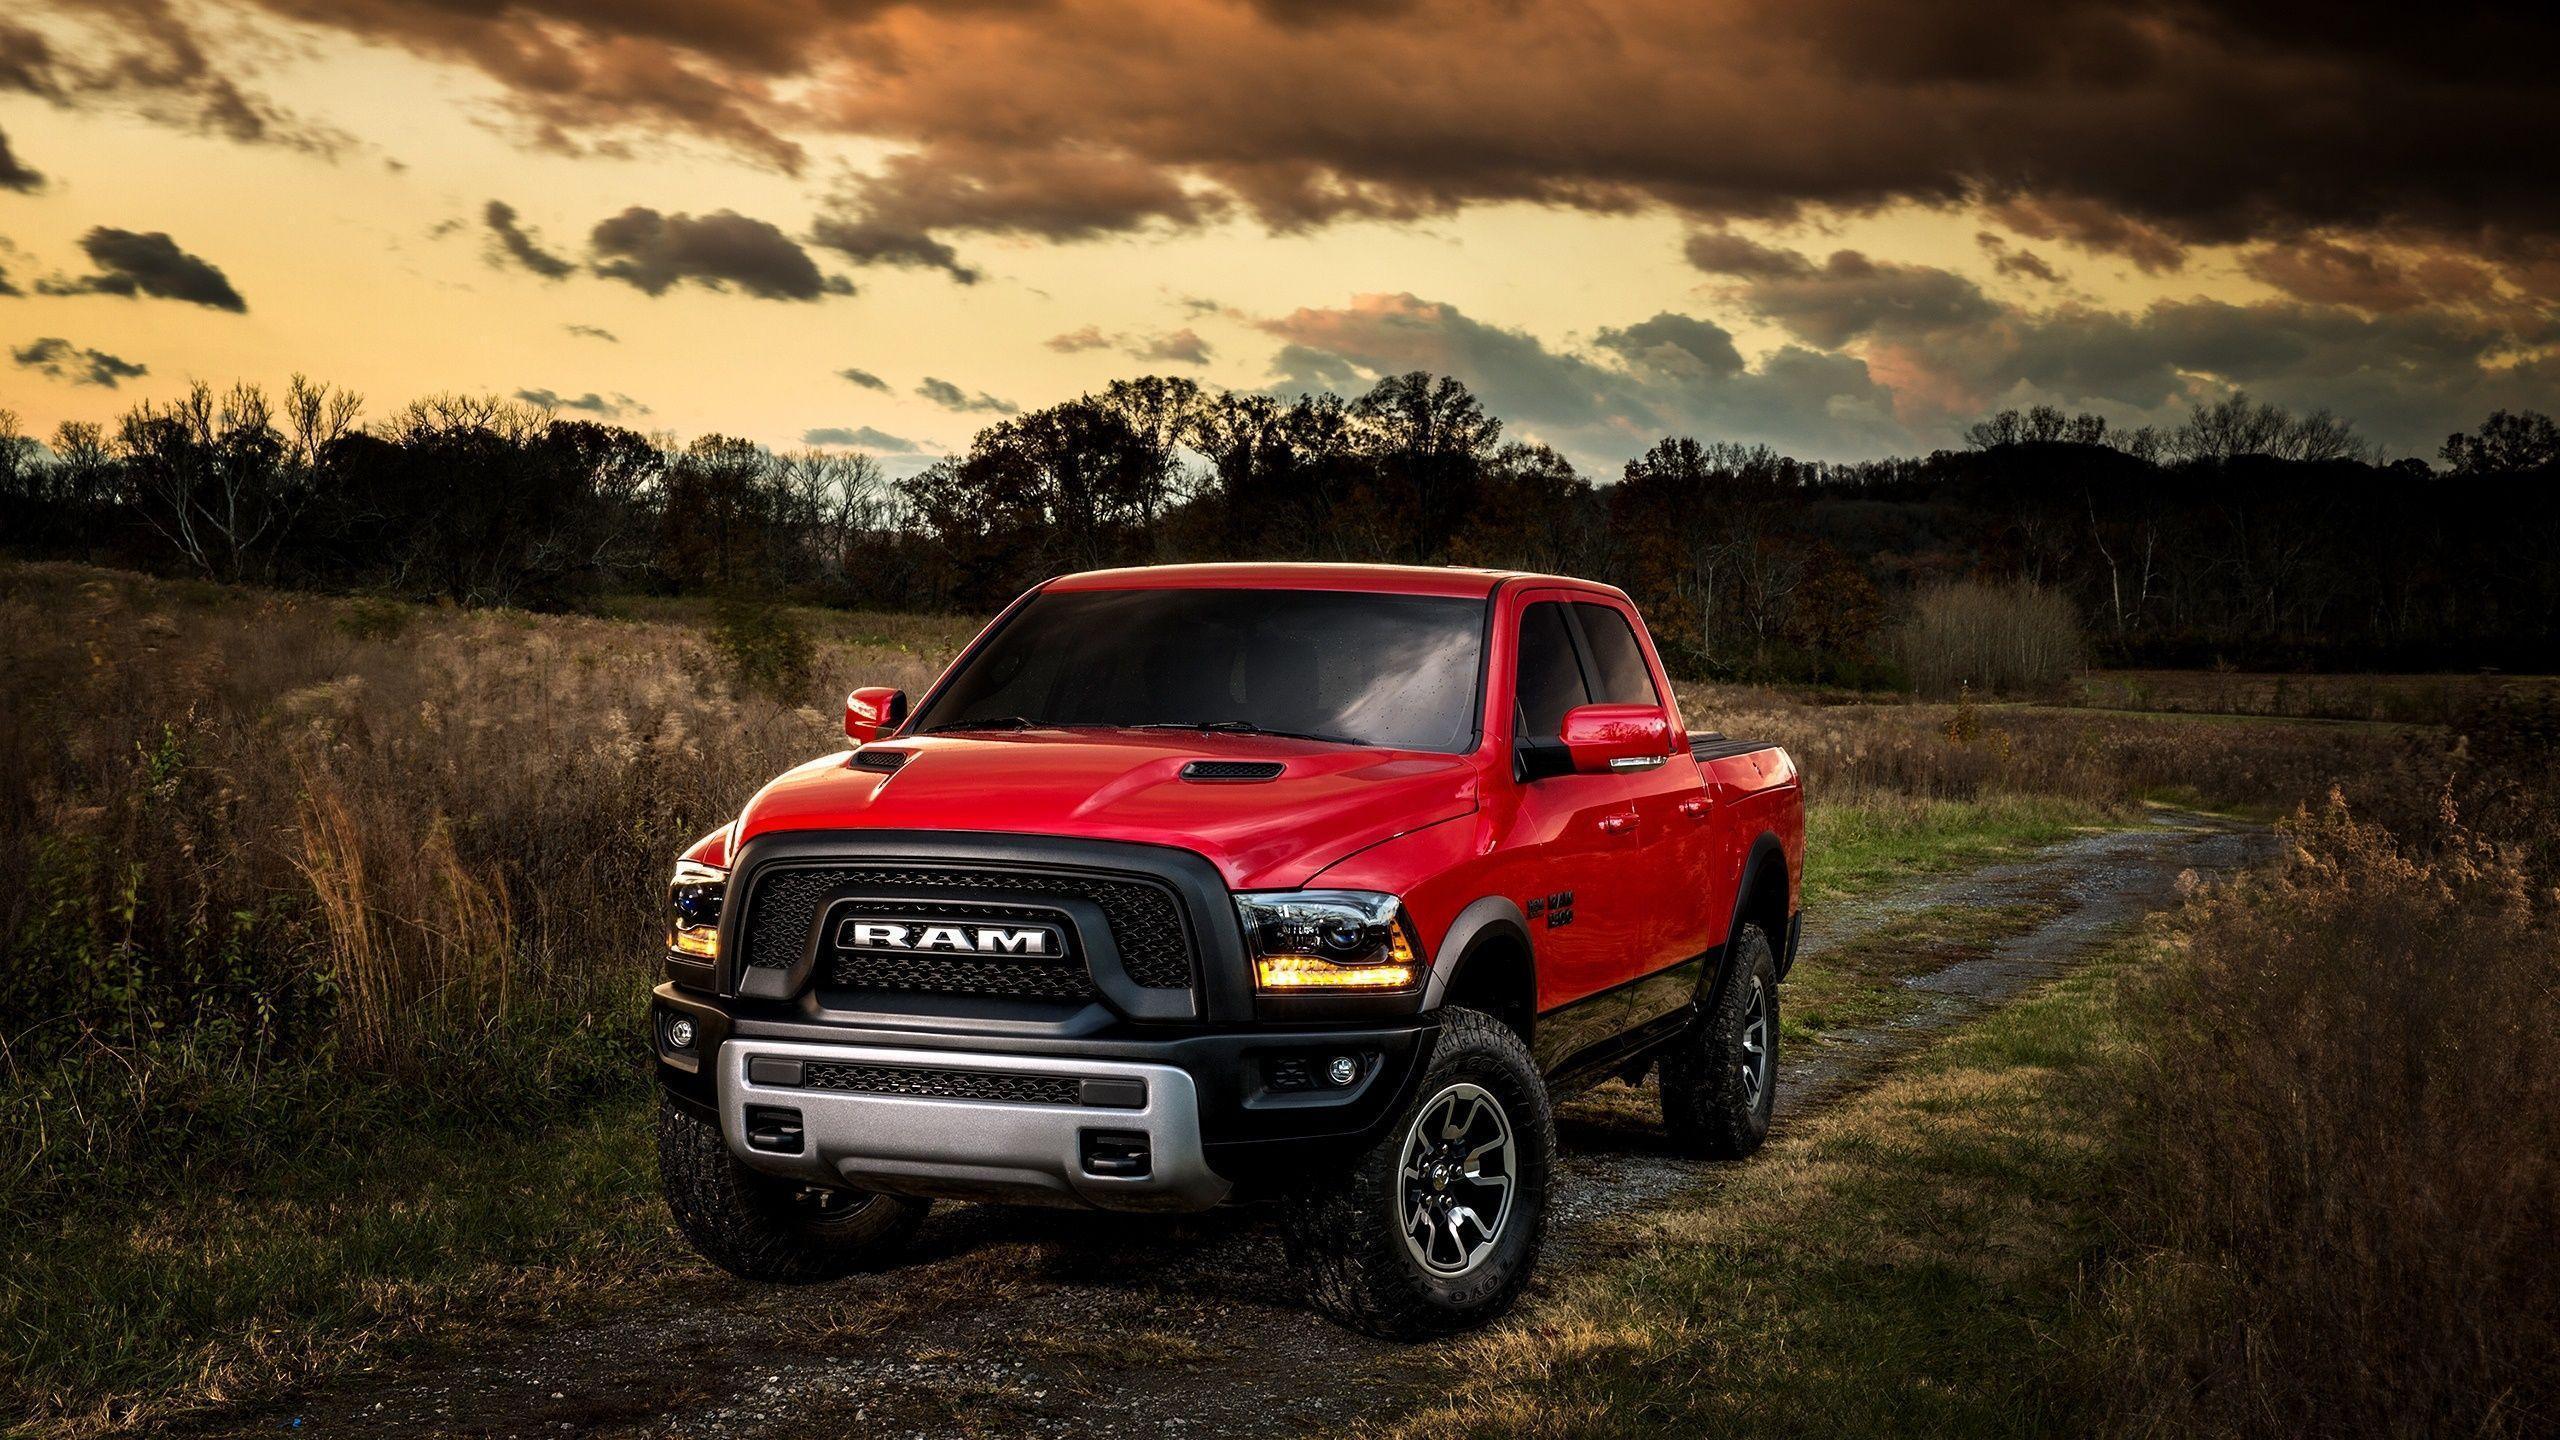 Ram Pickup Wallpaper Image Photo Picture Background